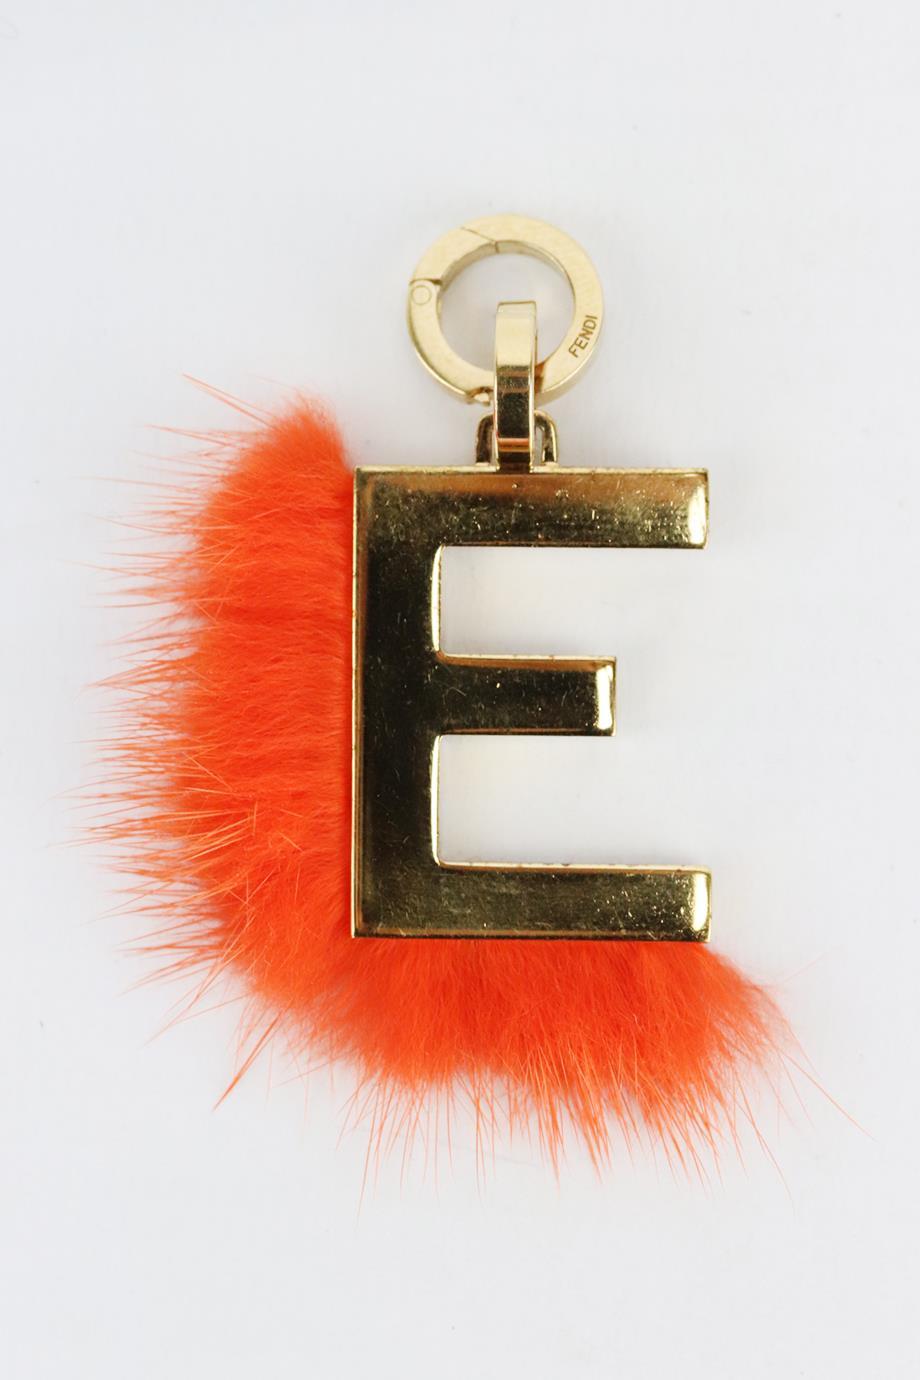 Fendi E initial gold plated bag charm. Made from gold-plated brass and pink min-fur in a E shape. Gold and orange. Clasp fastening at top. Does not come with box or dustbag. Height: 1.2 in. Width: 0.9 in